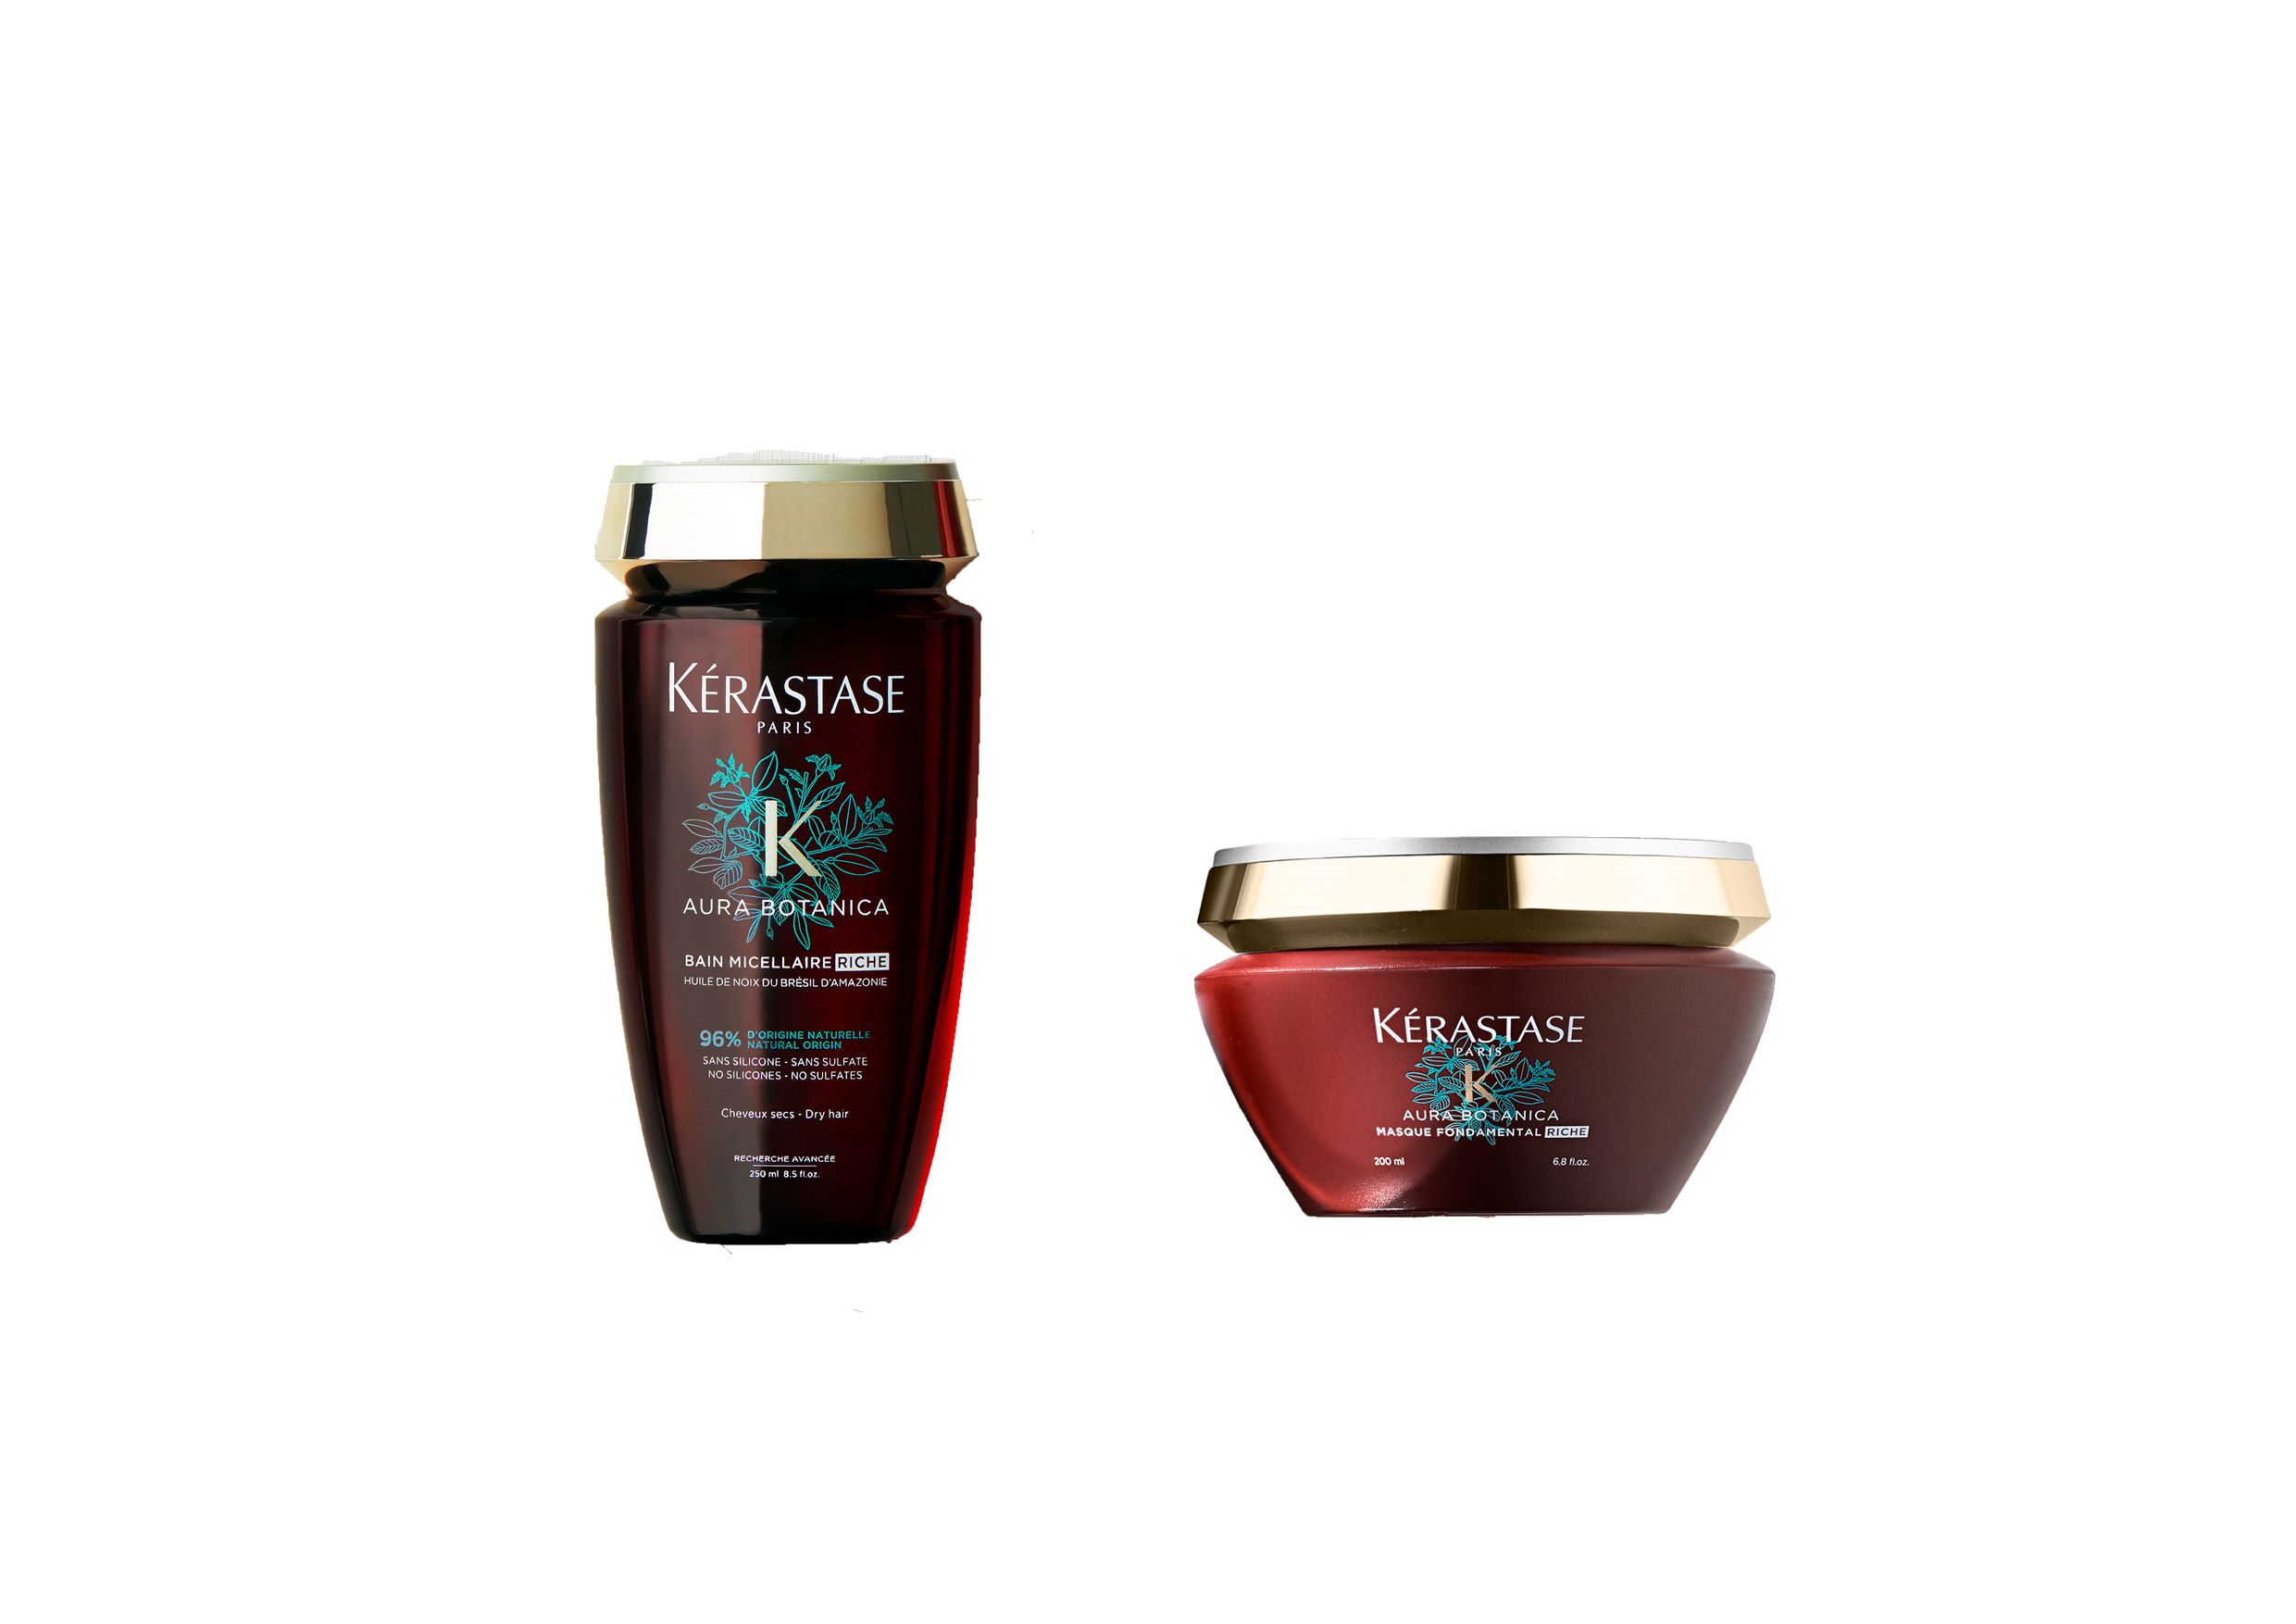 aura botanica riche new products - the micellaire bain and the masque absolu